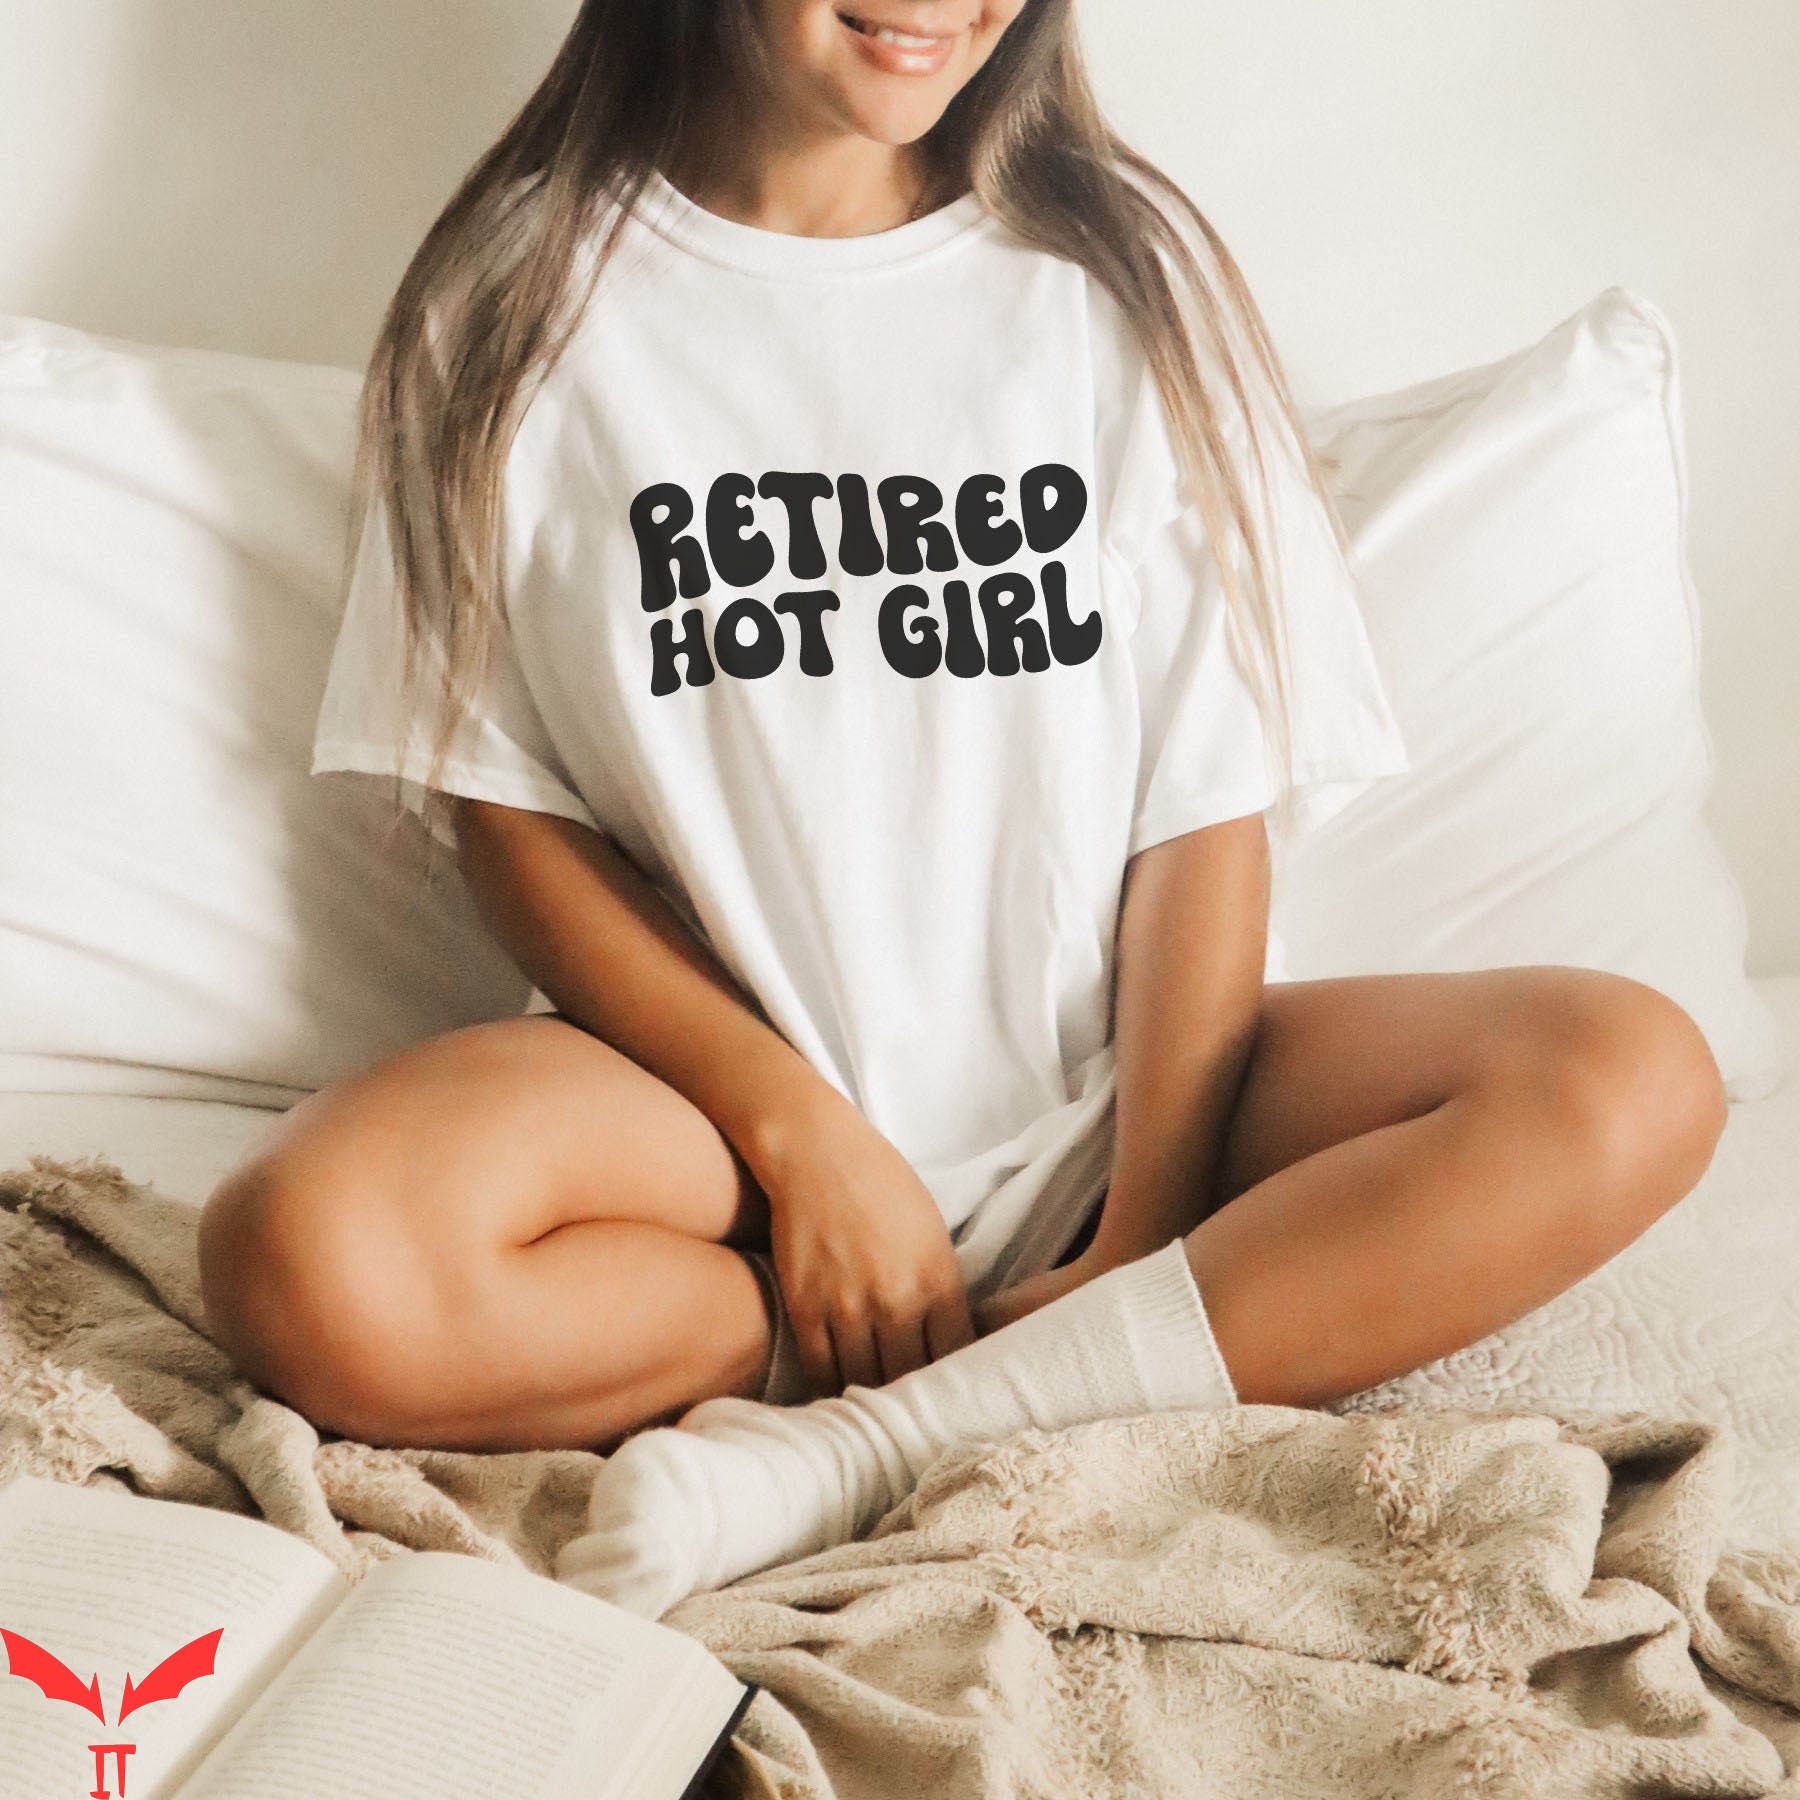 Retired Hot Girl T-Shirt Cool Quotes Funny Meme Tee Shirt